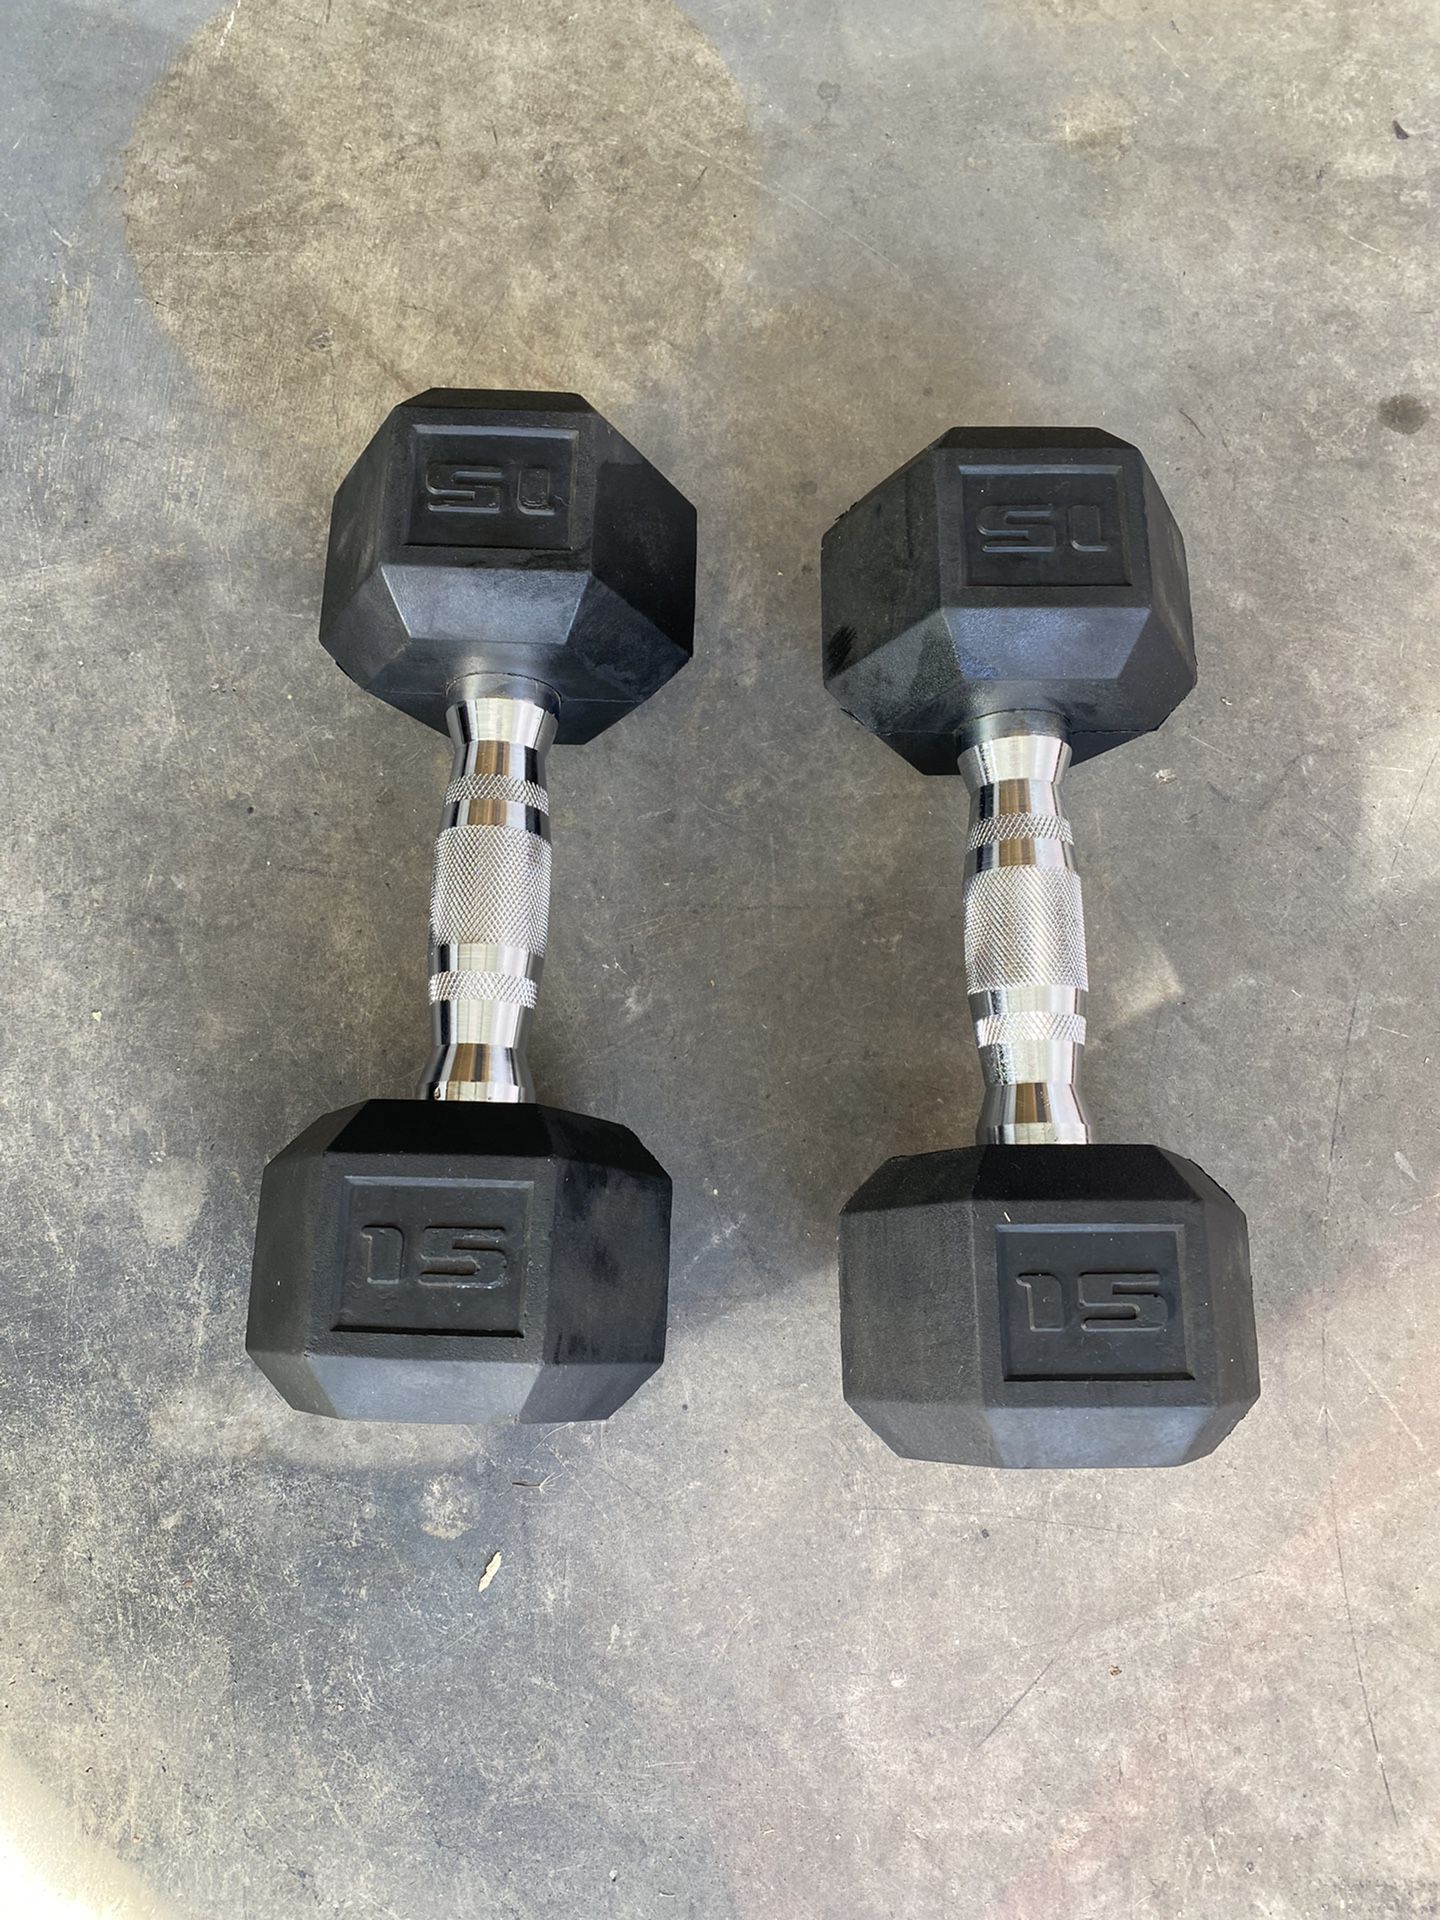 Rubber Coated 15 Pound Dumbbells (new)